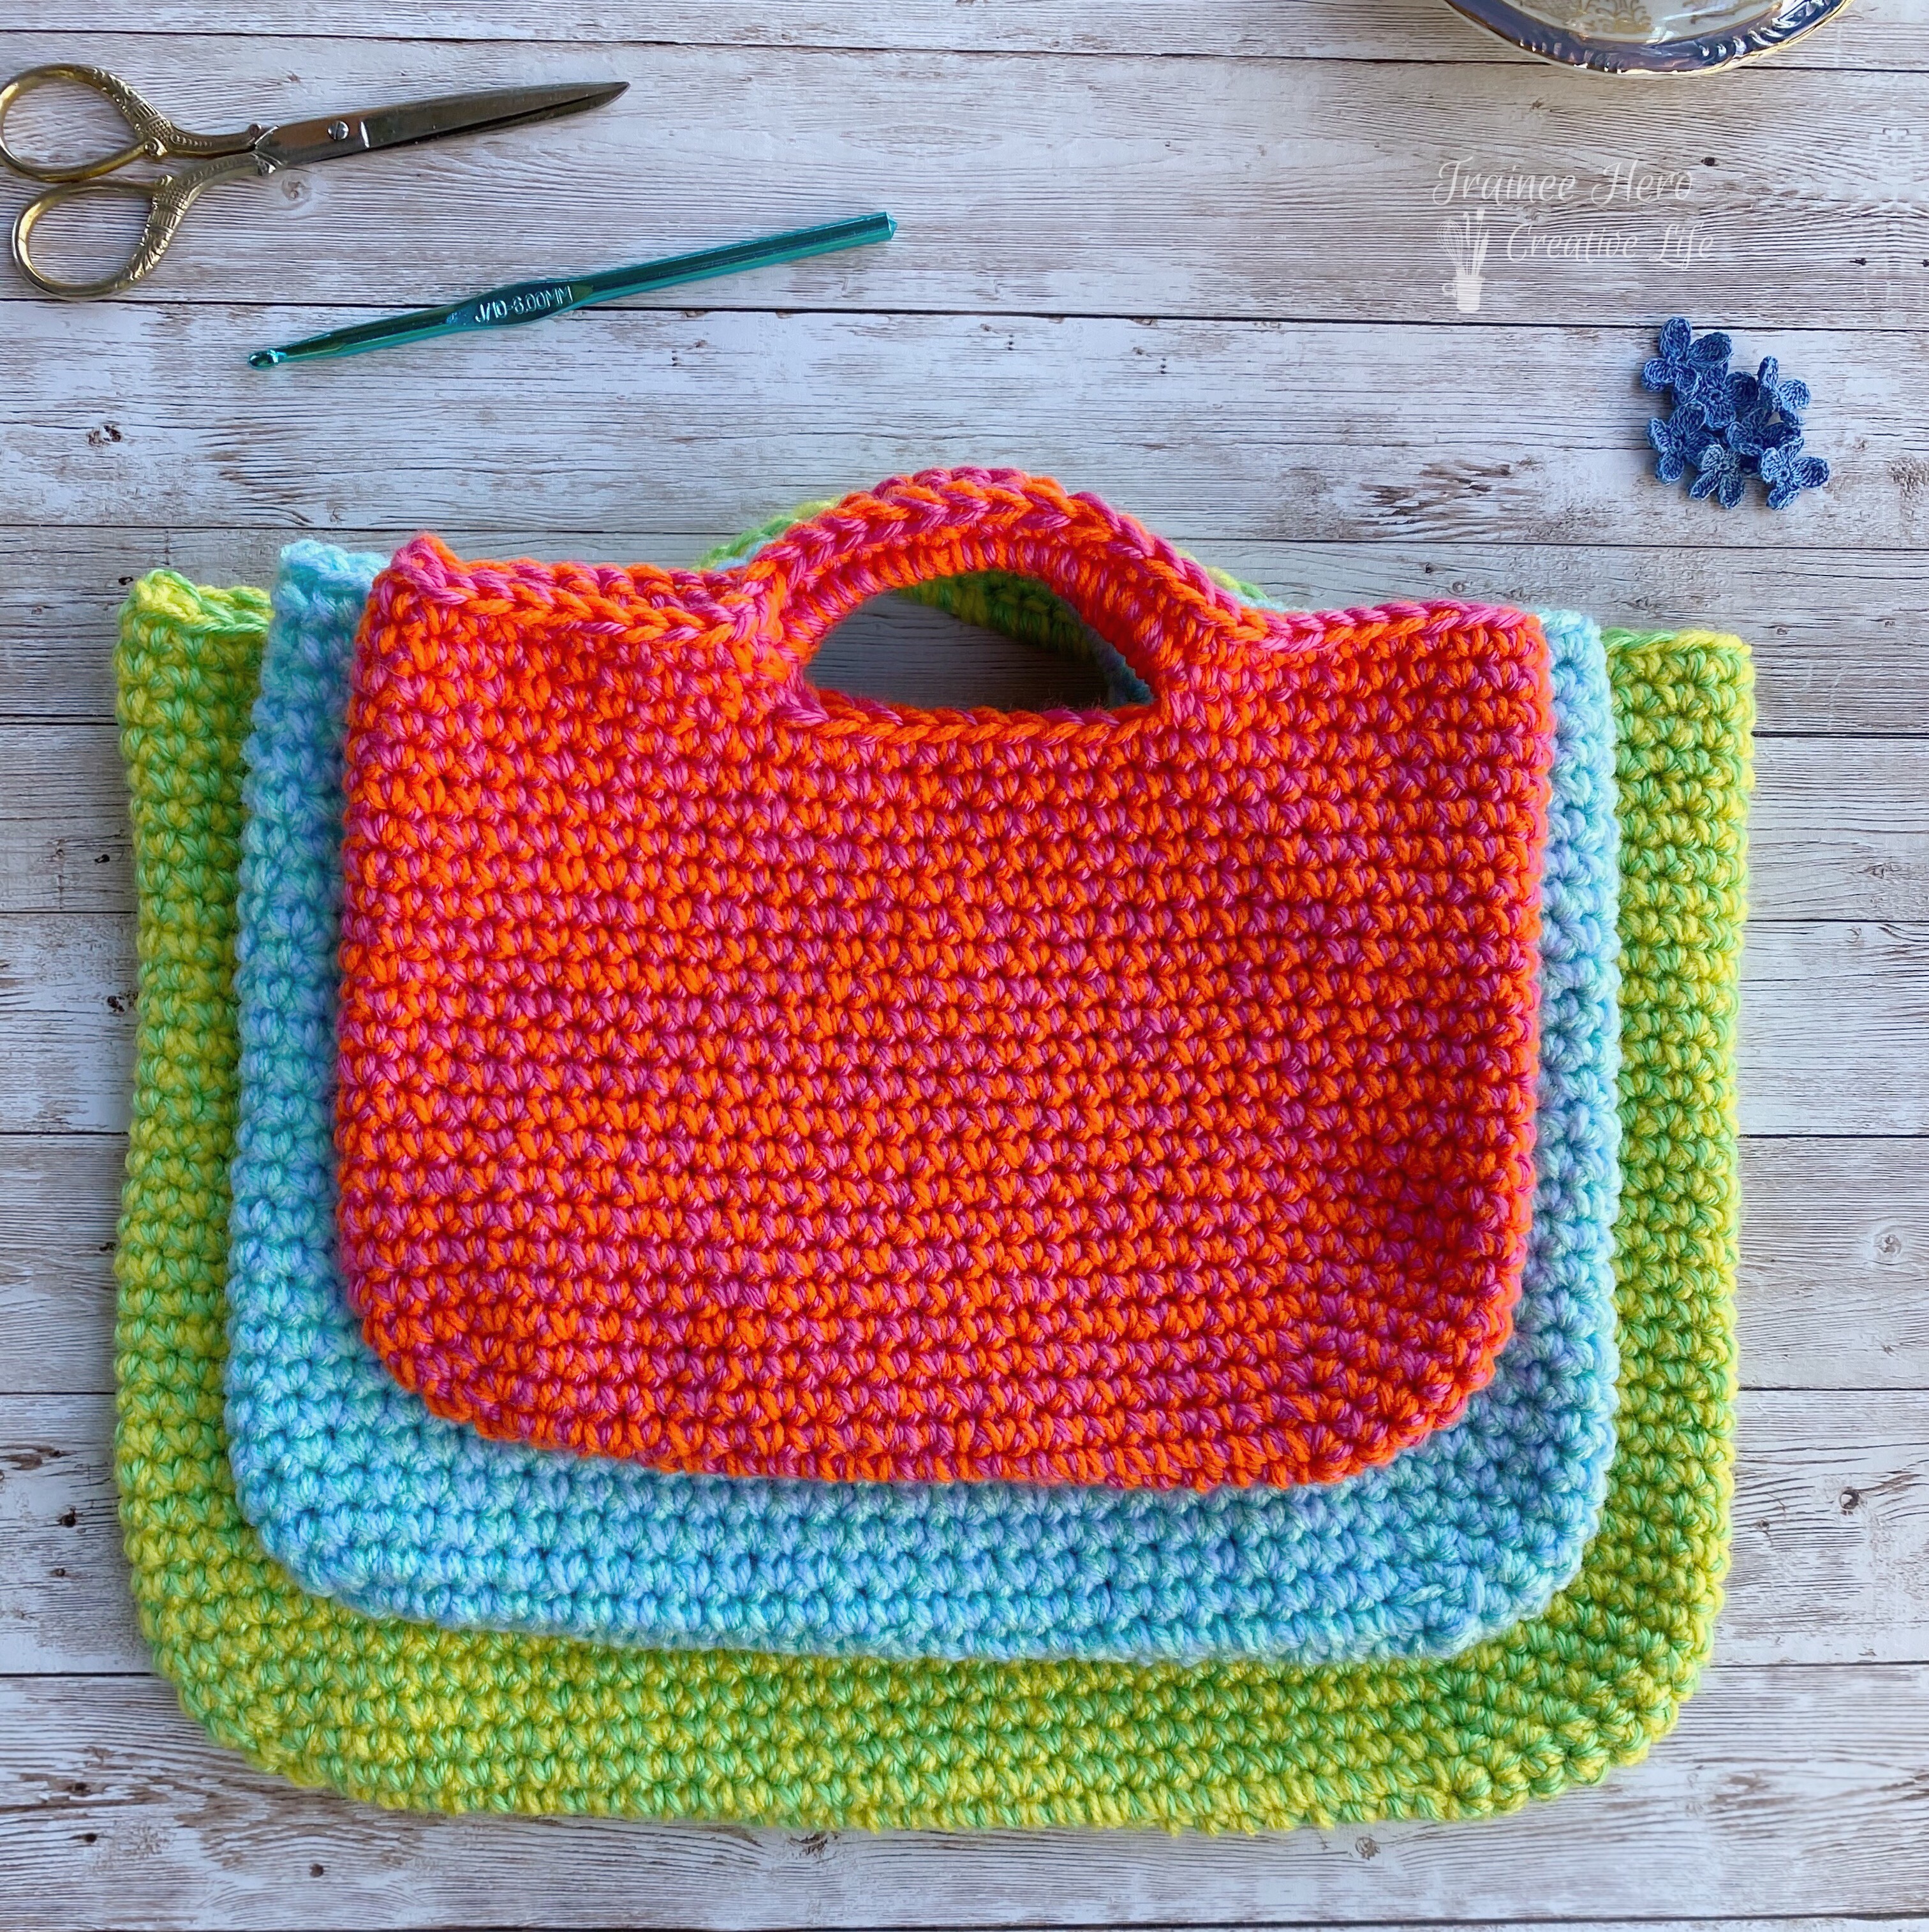 A stack of crochet project bags, the  smallest one on top.